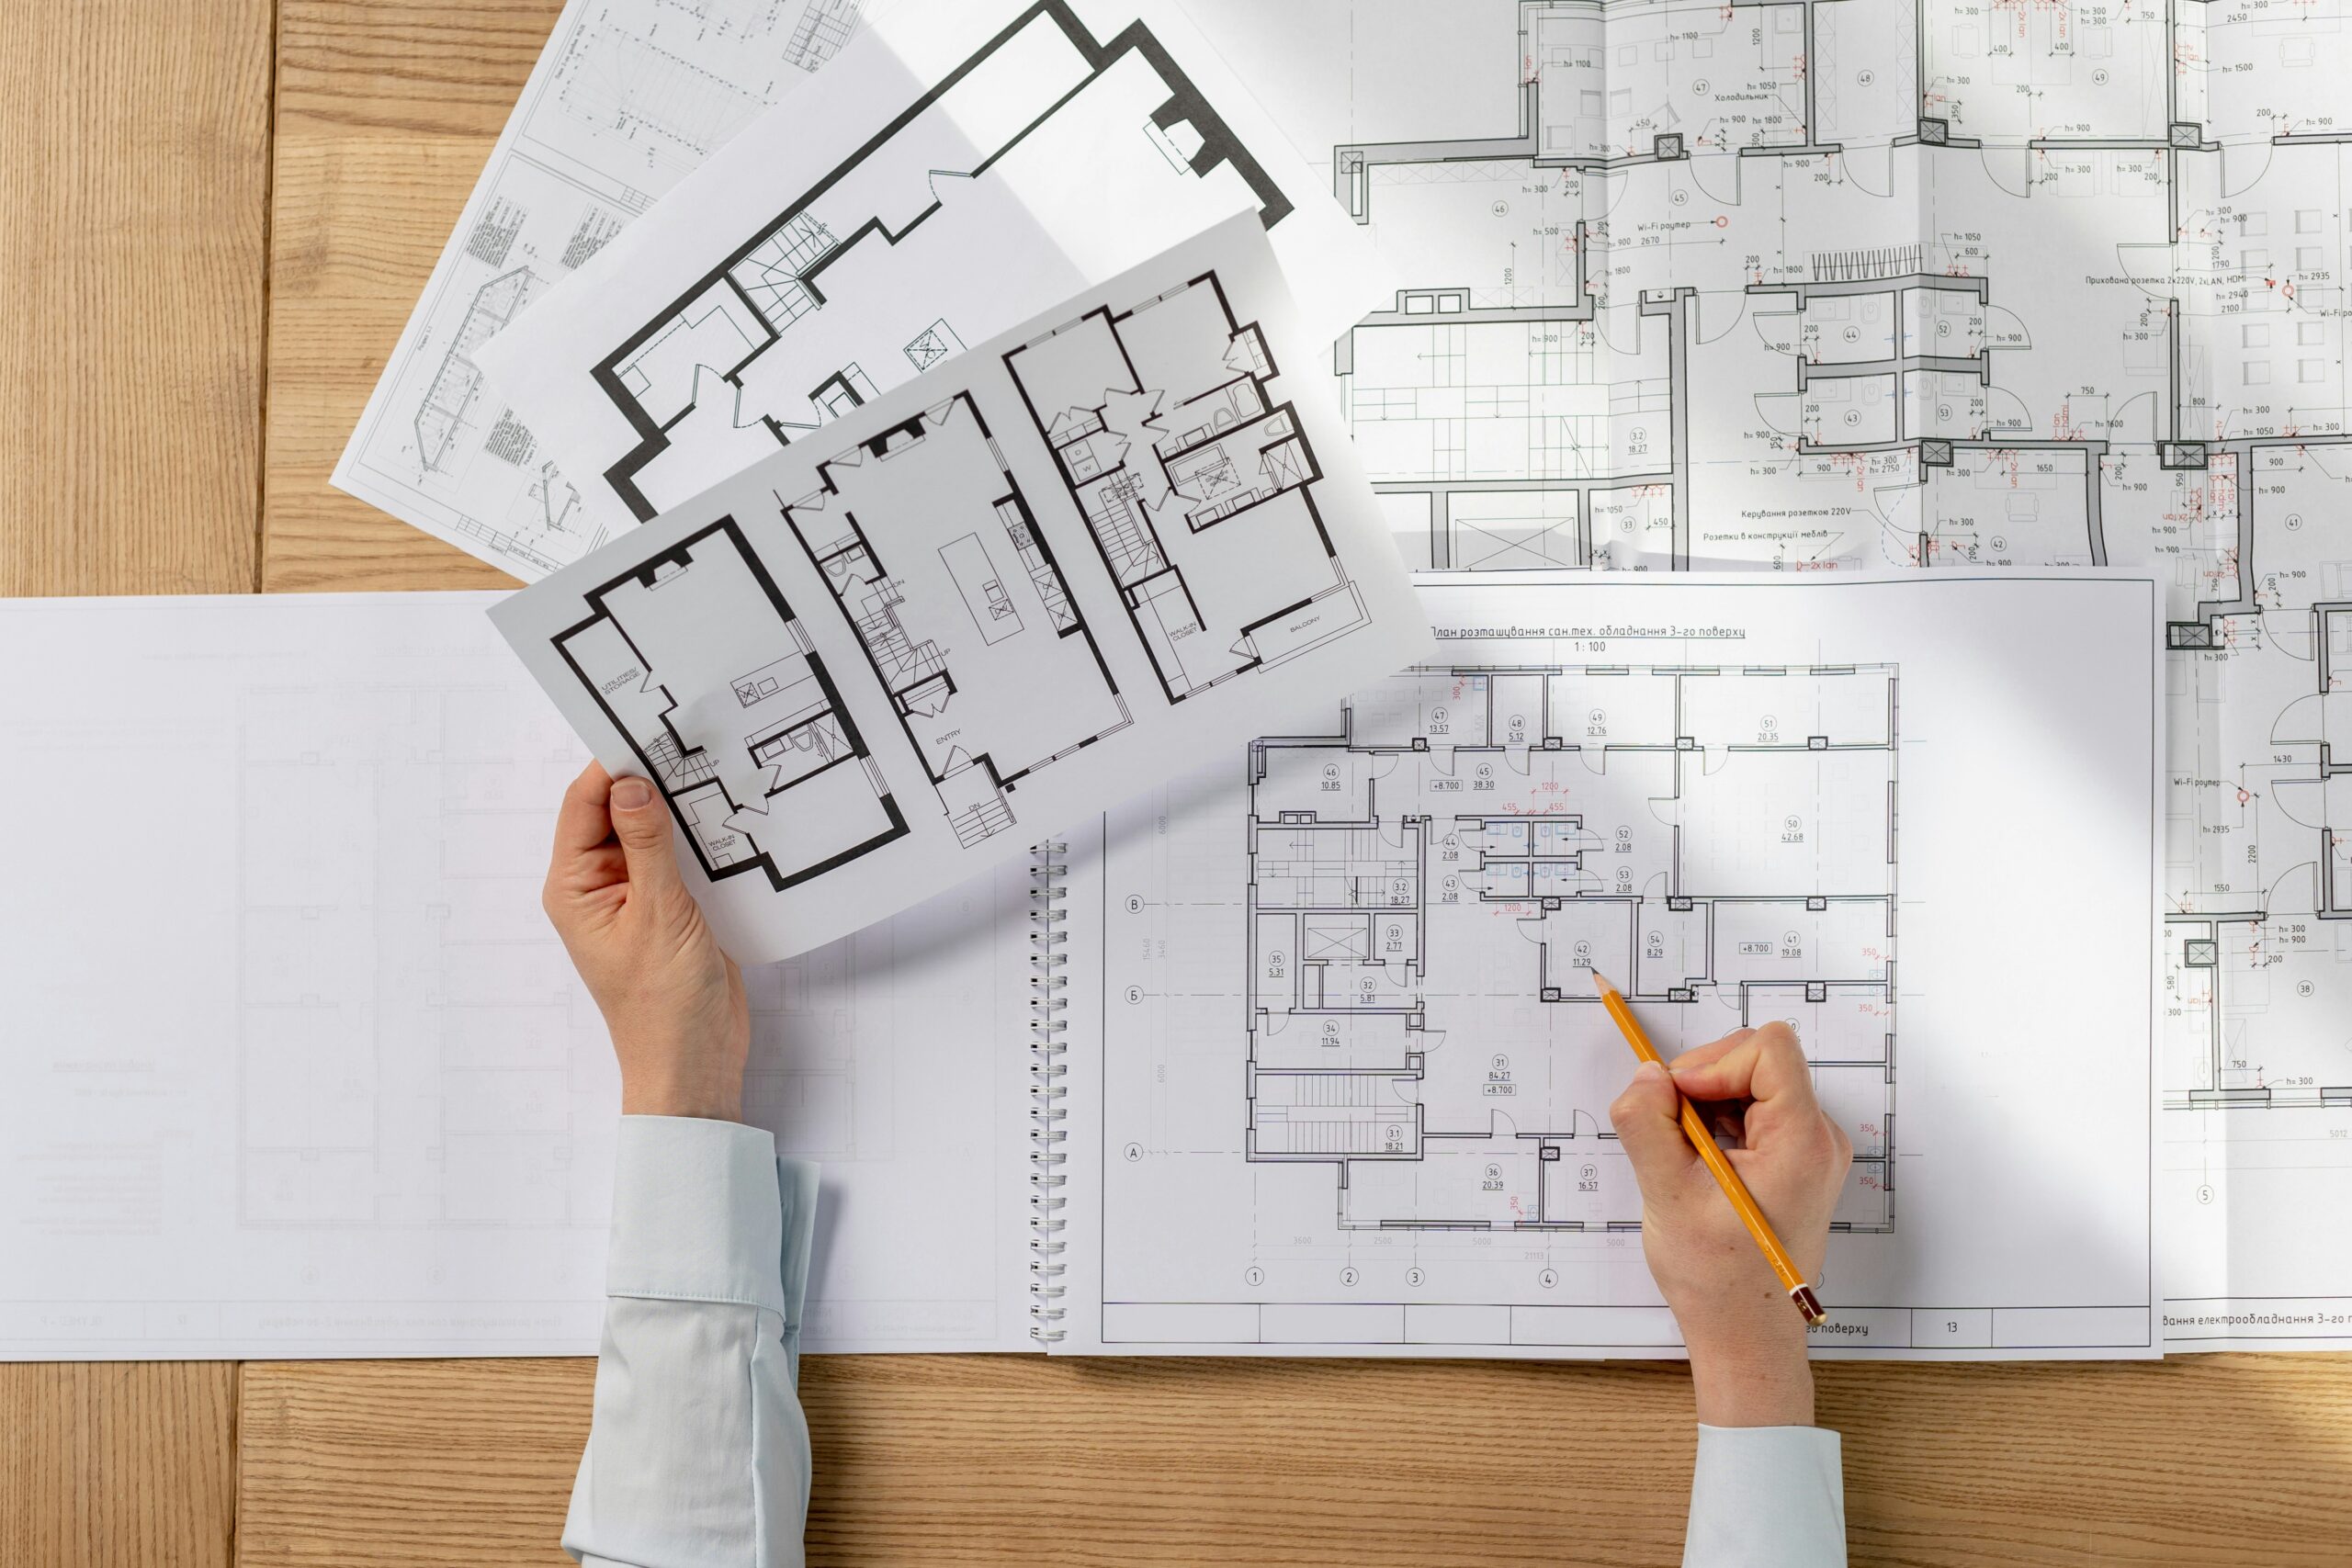 A person working on floor plans for a building.